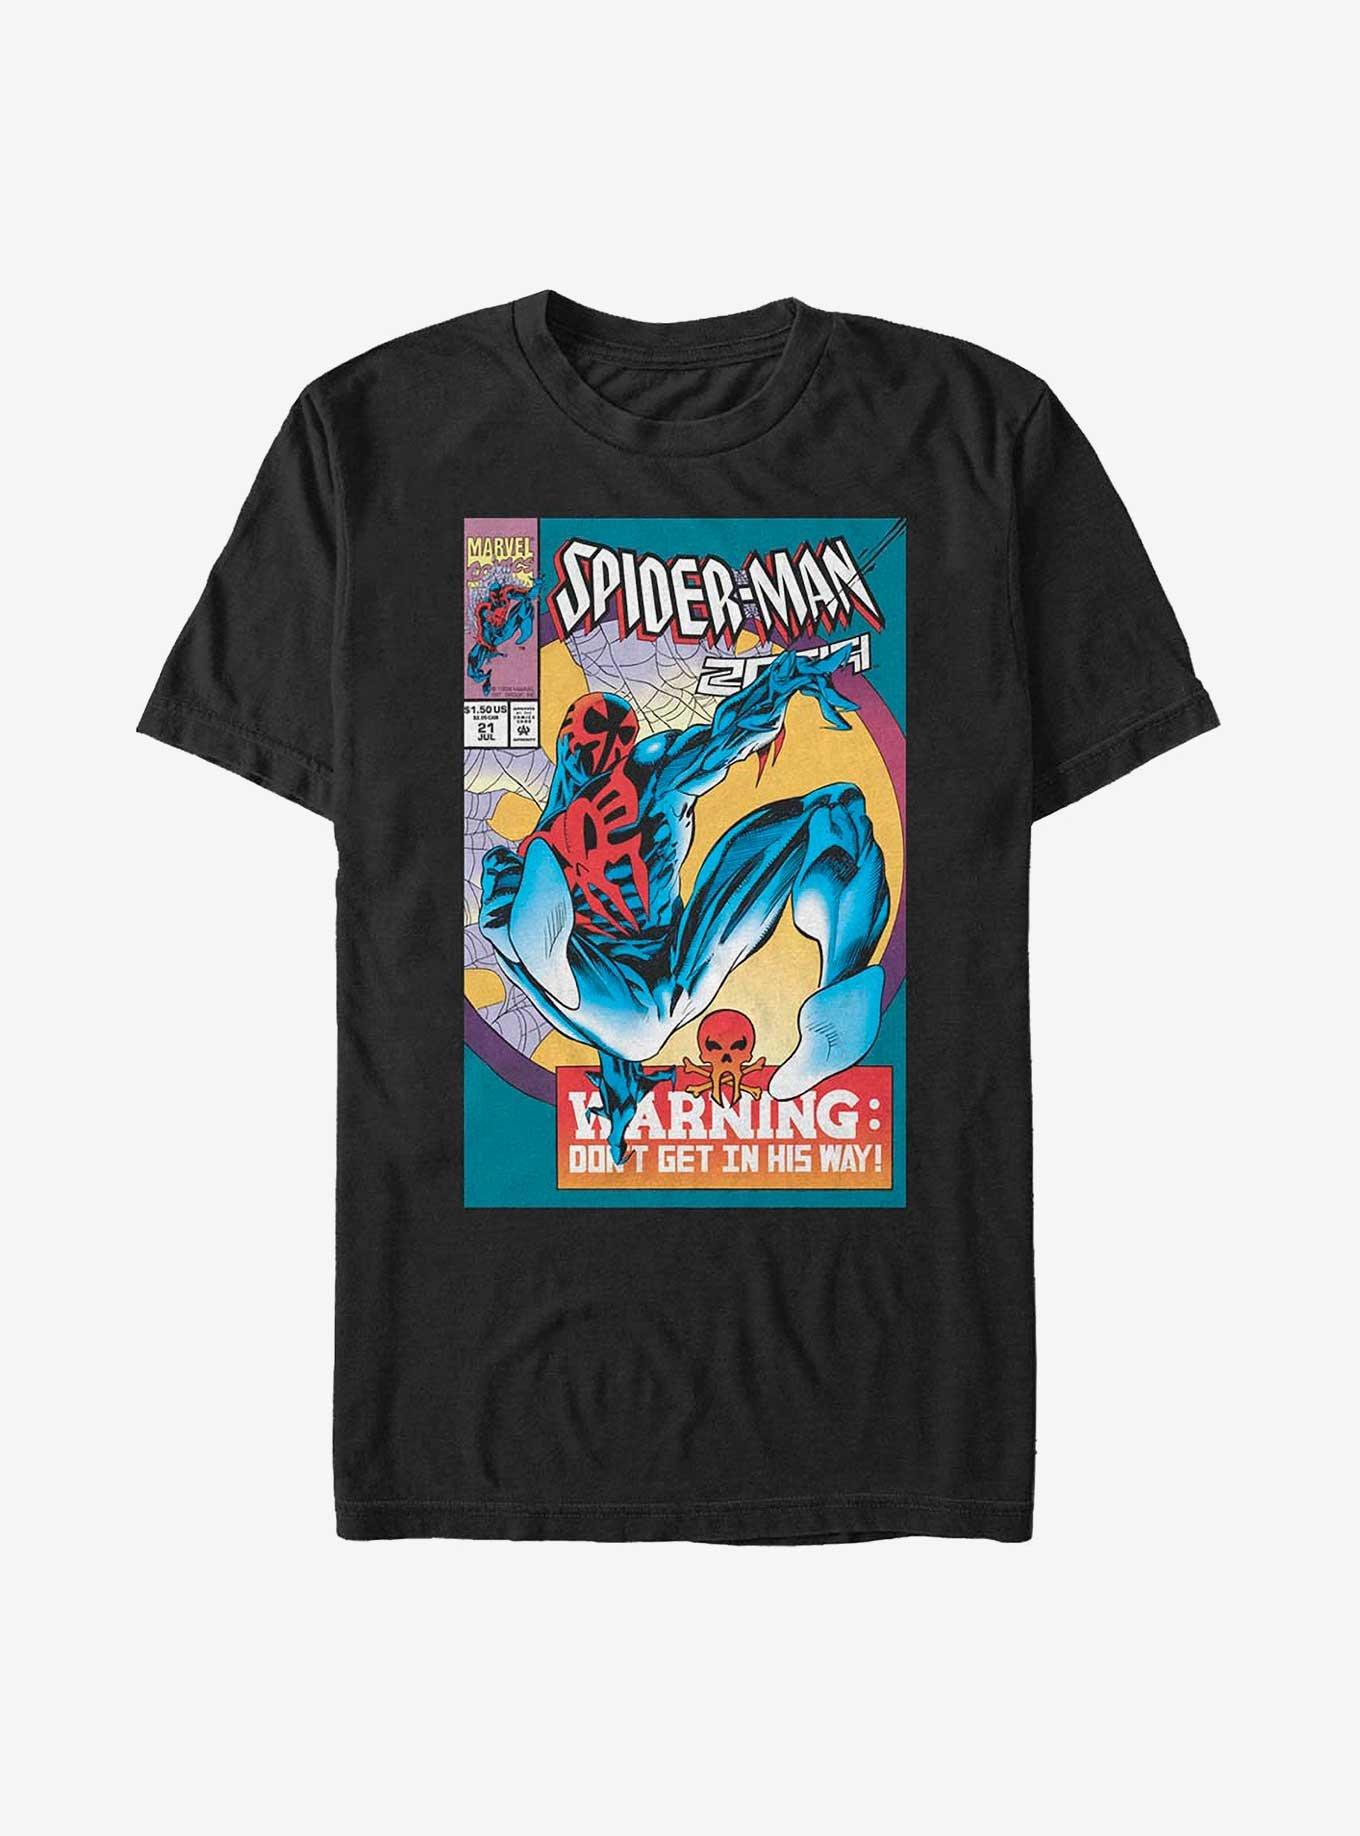 Marvel Spider-Man Don't Get His Way T-Shirt